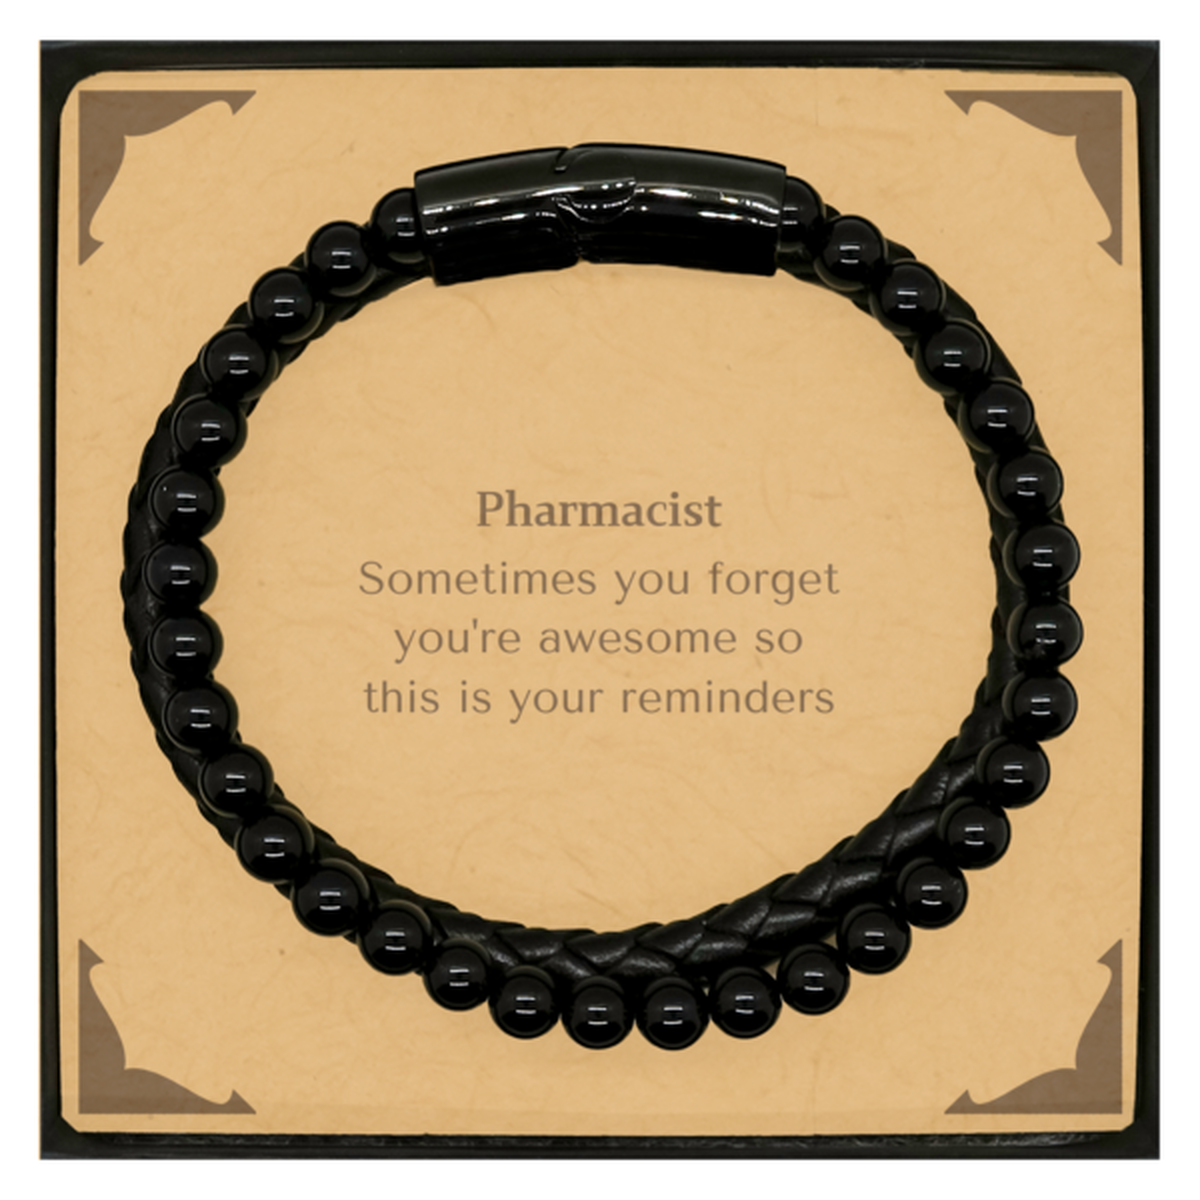 Sentimental Pharmacist Stone Leather Bracelets, Pharmacist Sometimes you forget you're awesome so this is your reminders, Graduation Christmas Birthday Gifts for Pharmacist, Men, Women, Coworkers